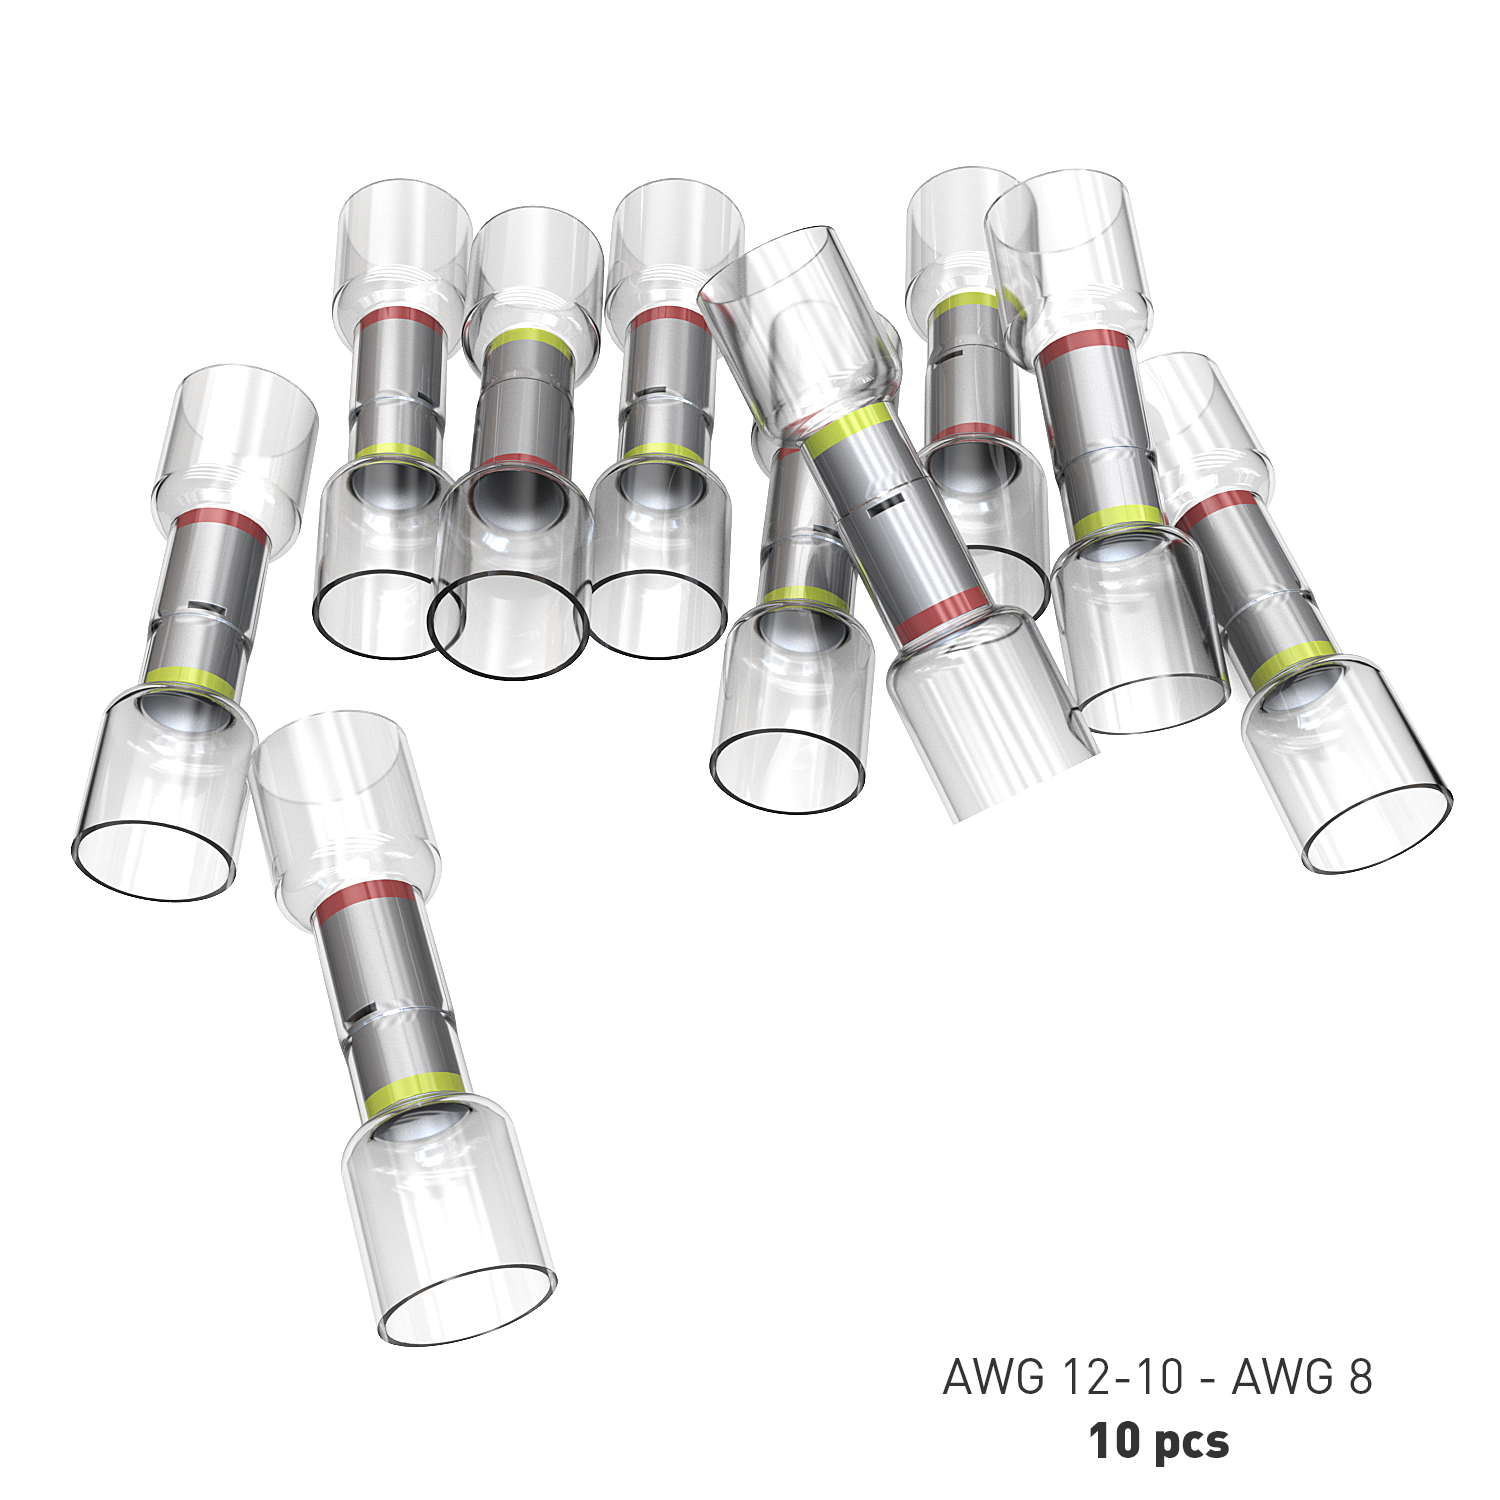 10 PC 8 AWG Step Down to 12-10 AWG Reducer Butt Connectors